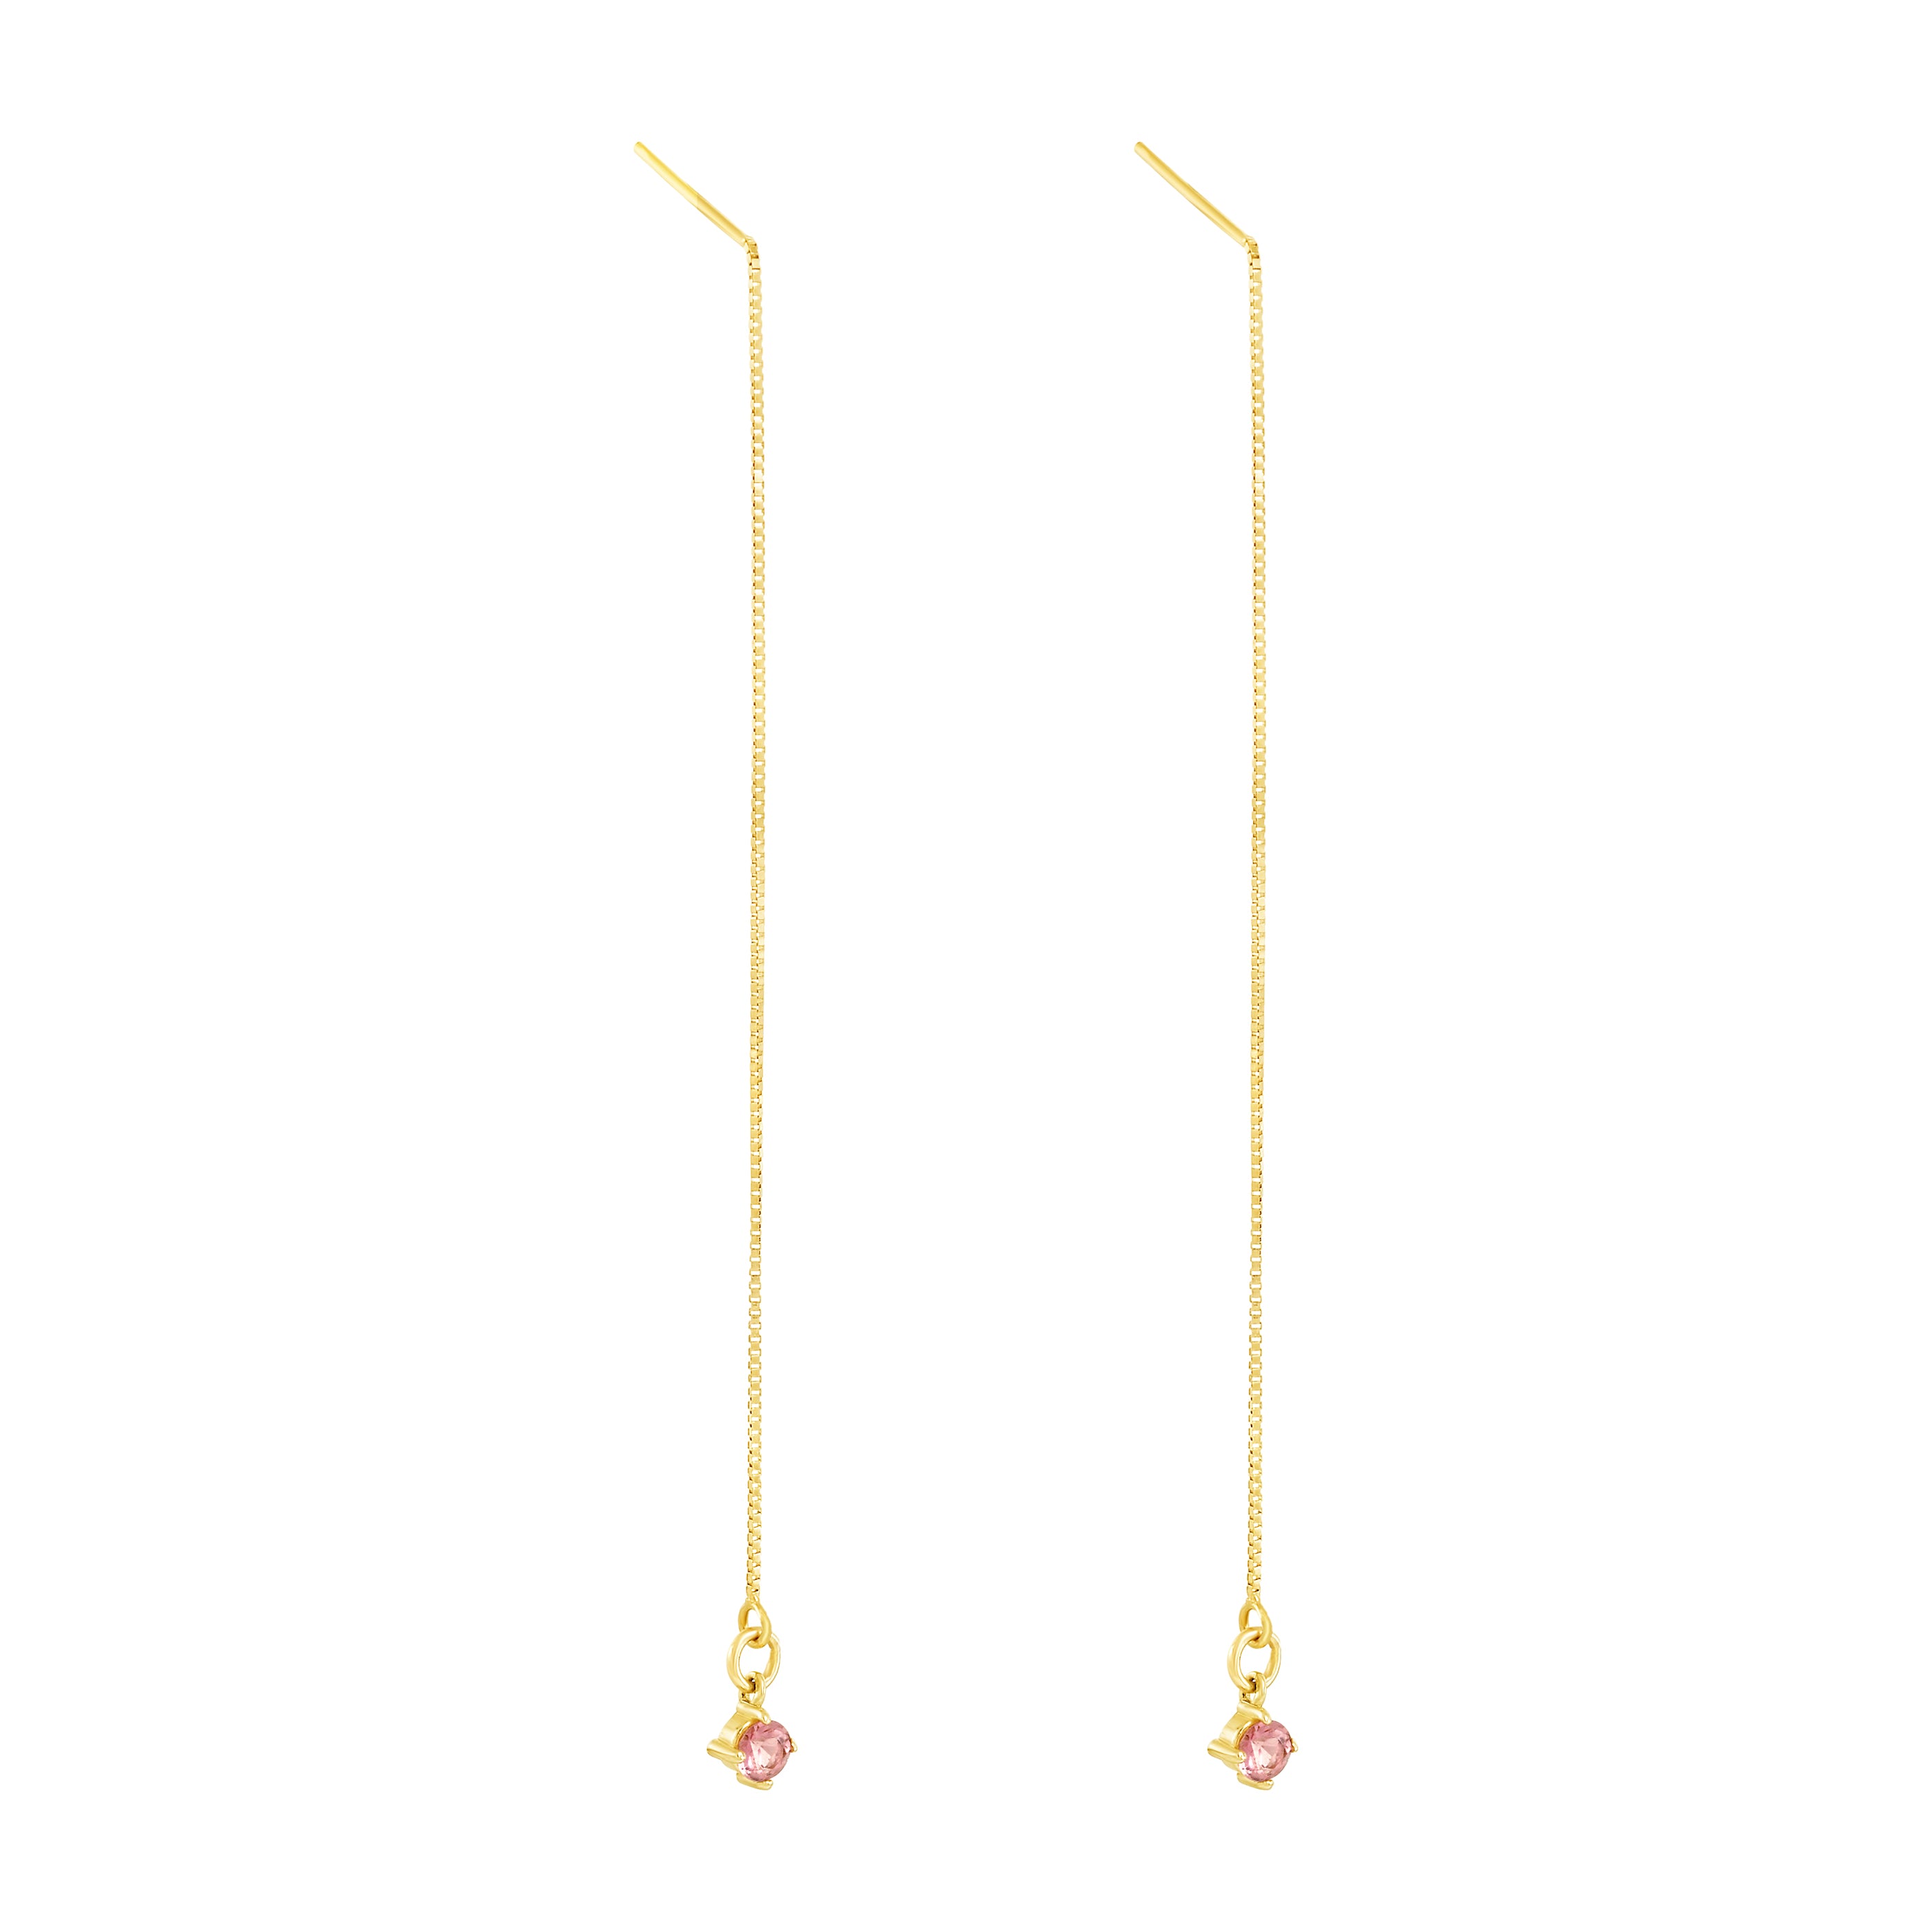 Only a few pairs left of our Pink Tourmaline Threader Earrings